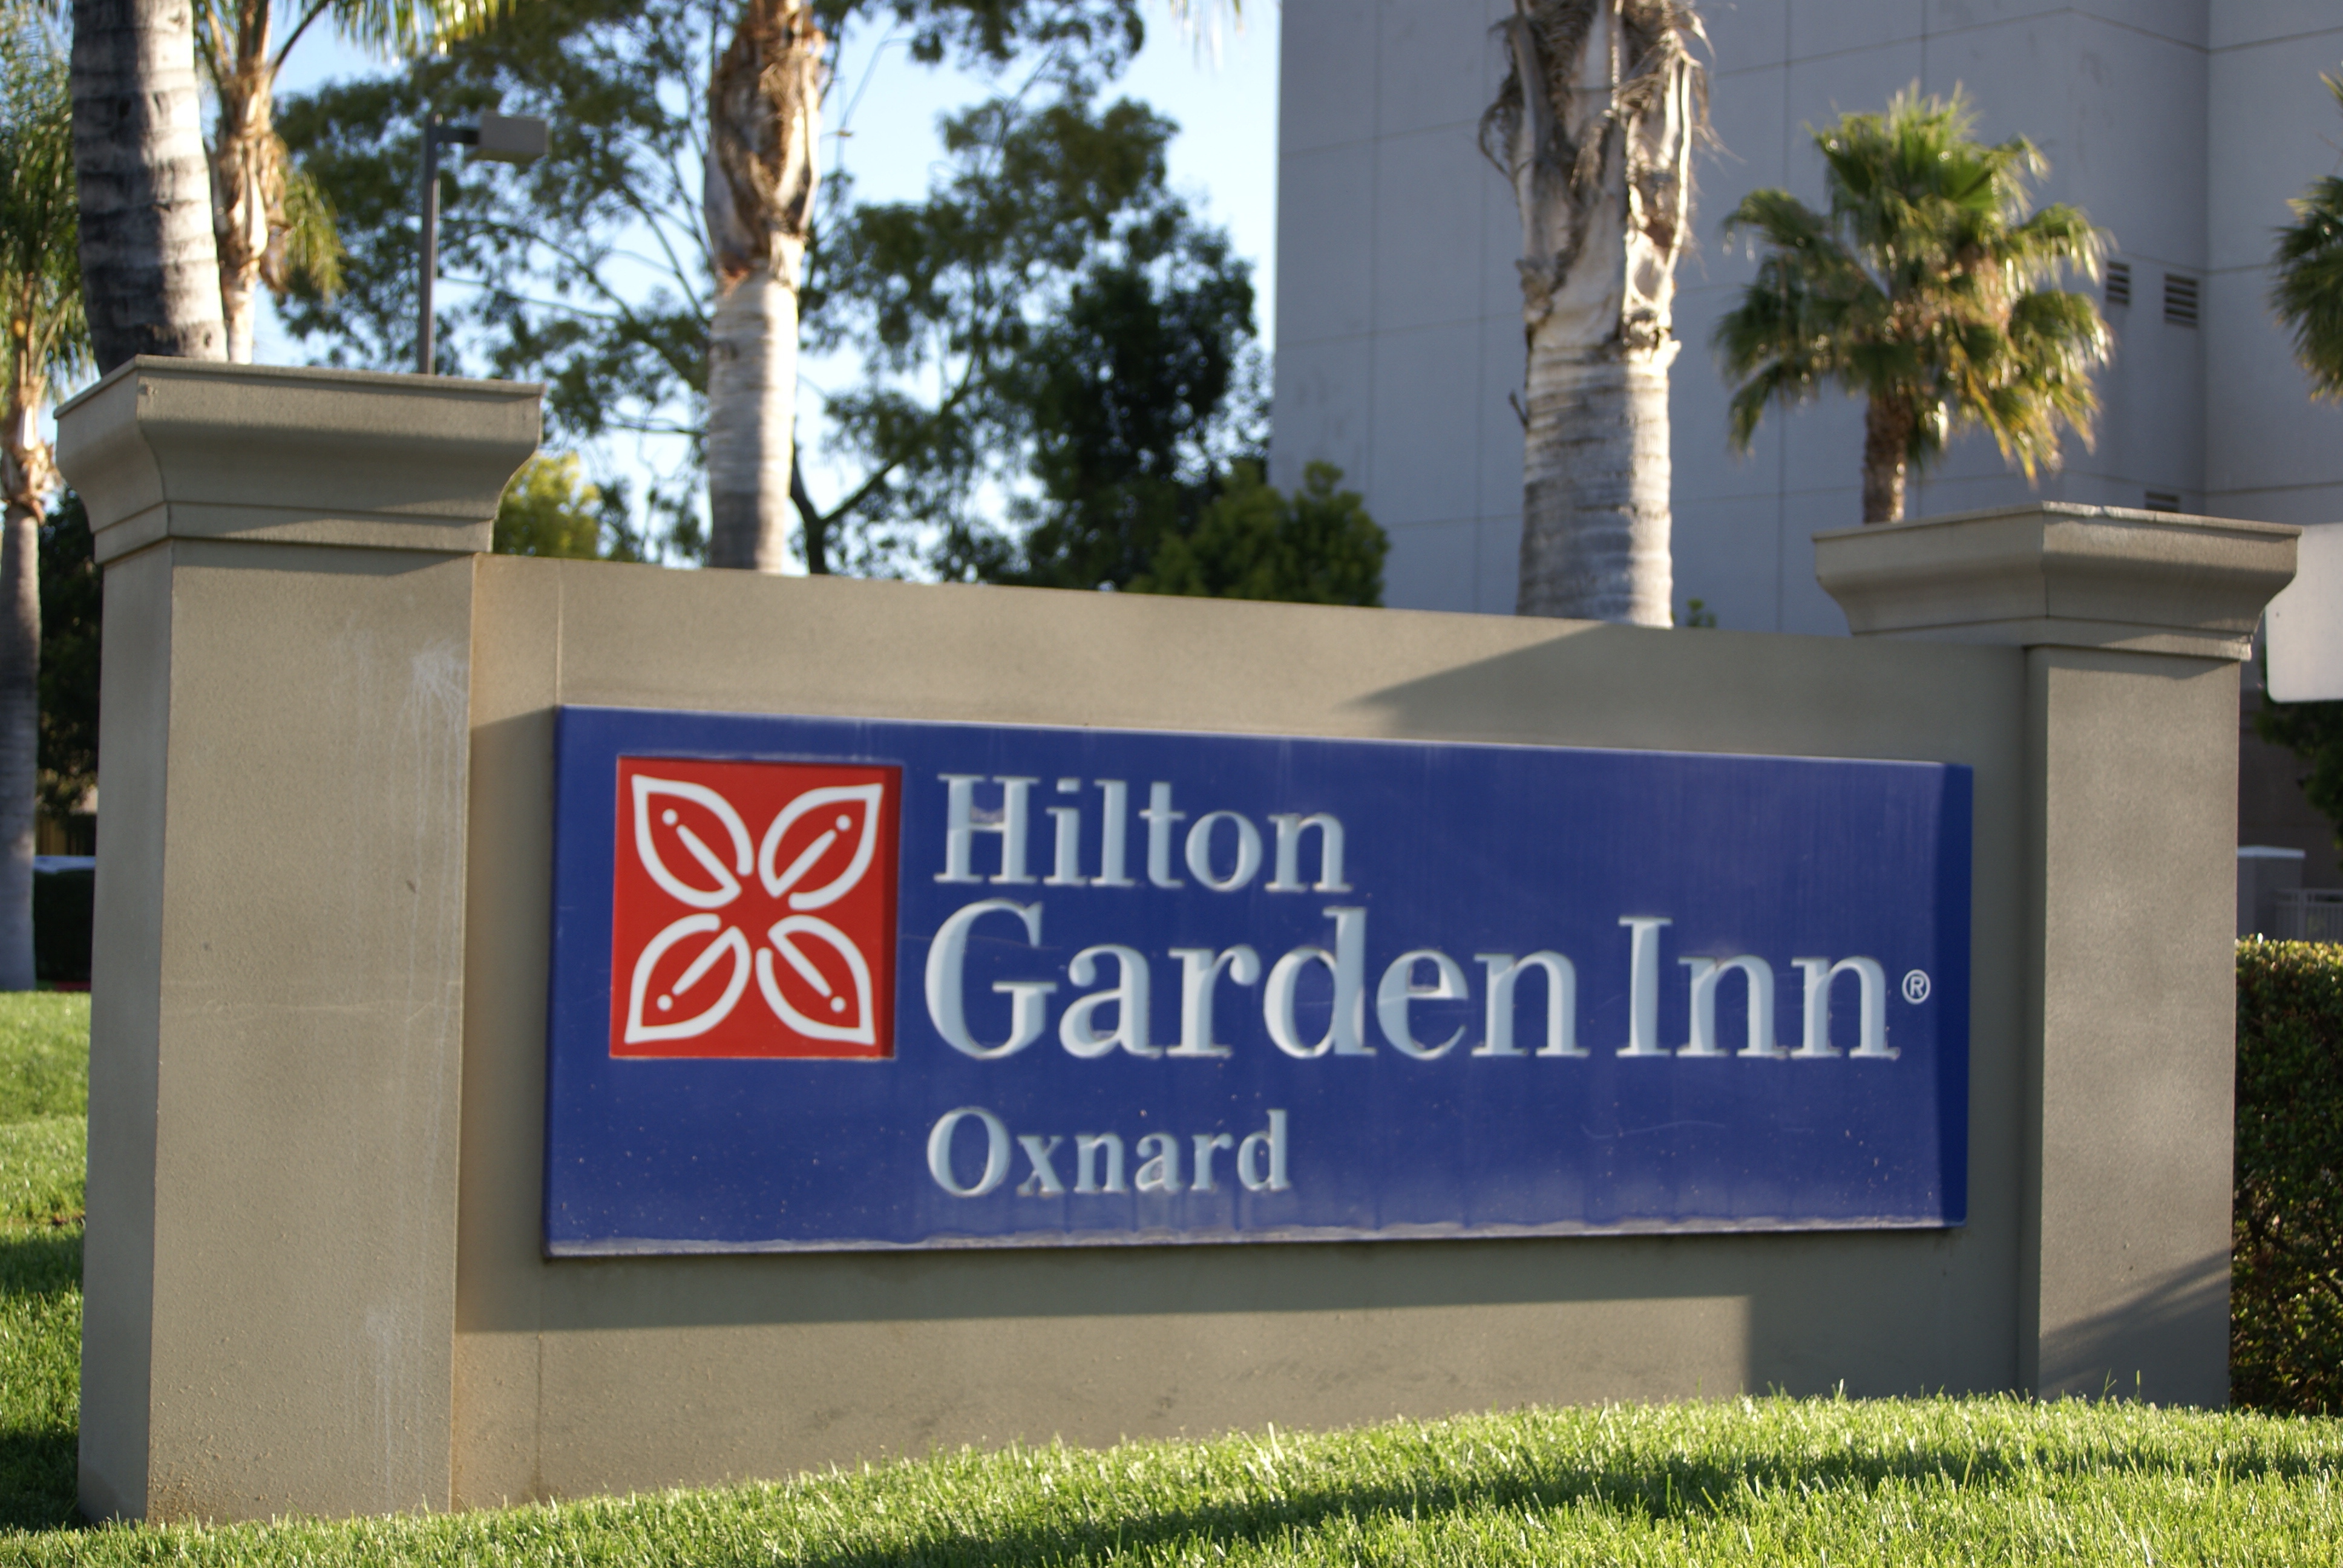 Daytime View of Hotel Signage and Landscaping